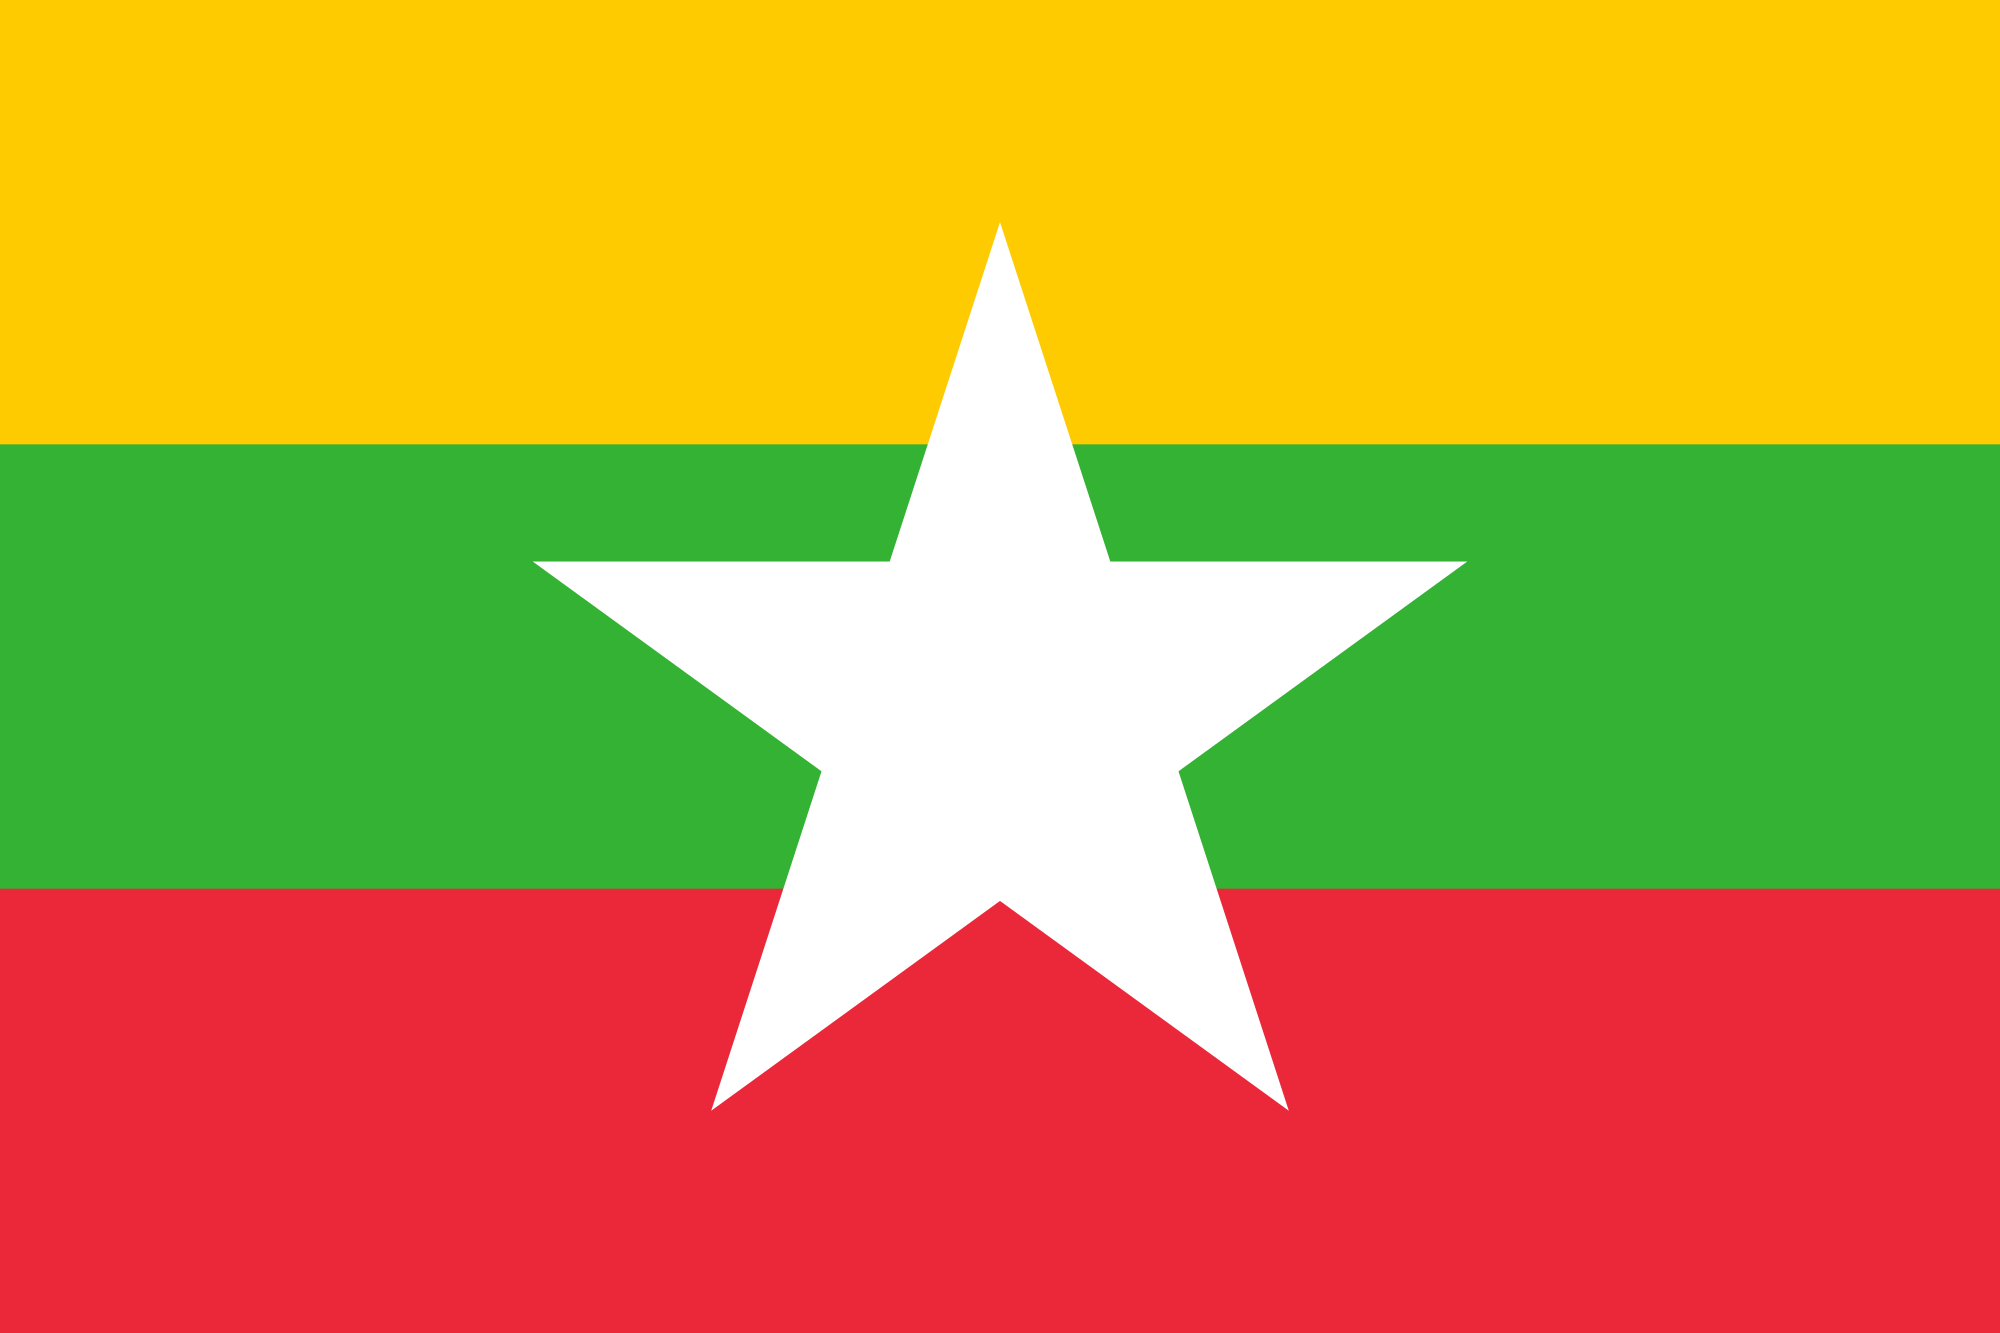 https://upload.wikimedia.org/wikipedia/commons/thumb/8/8c/Flag_of_Myanmar.svg/2000px-Flag_of_Myanmar.svg.png